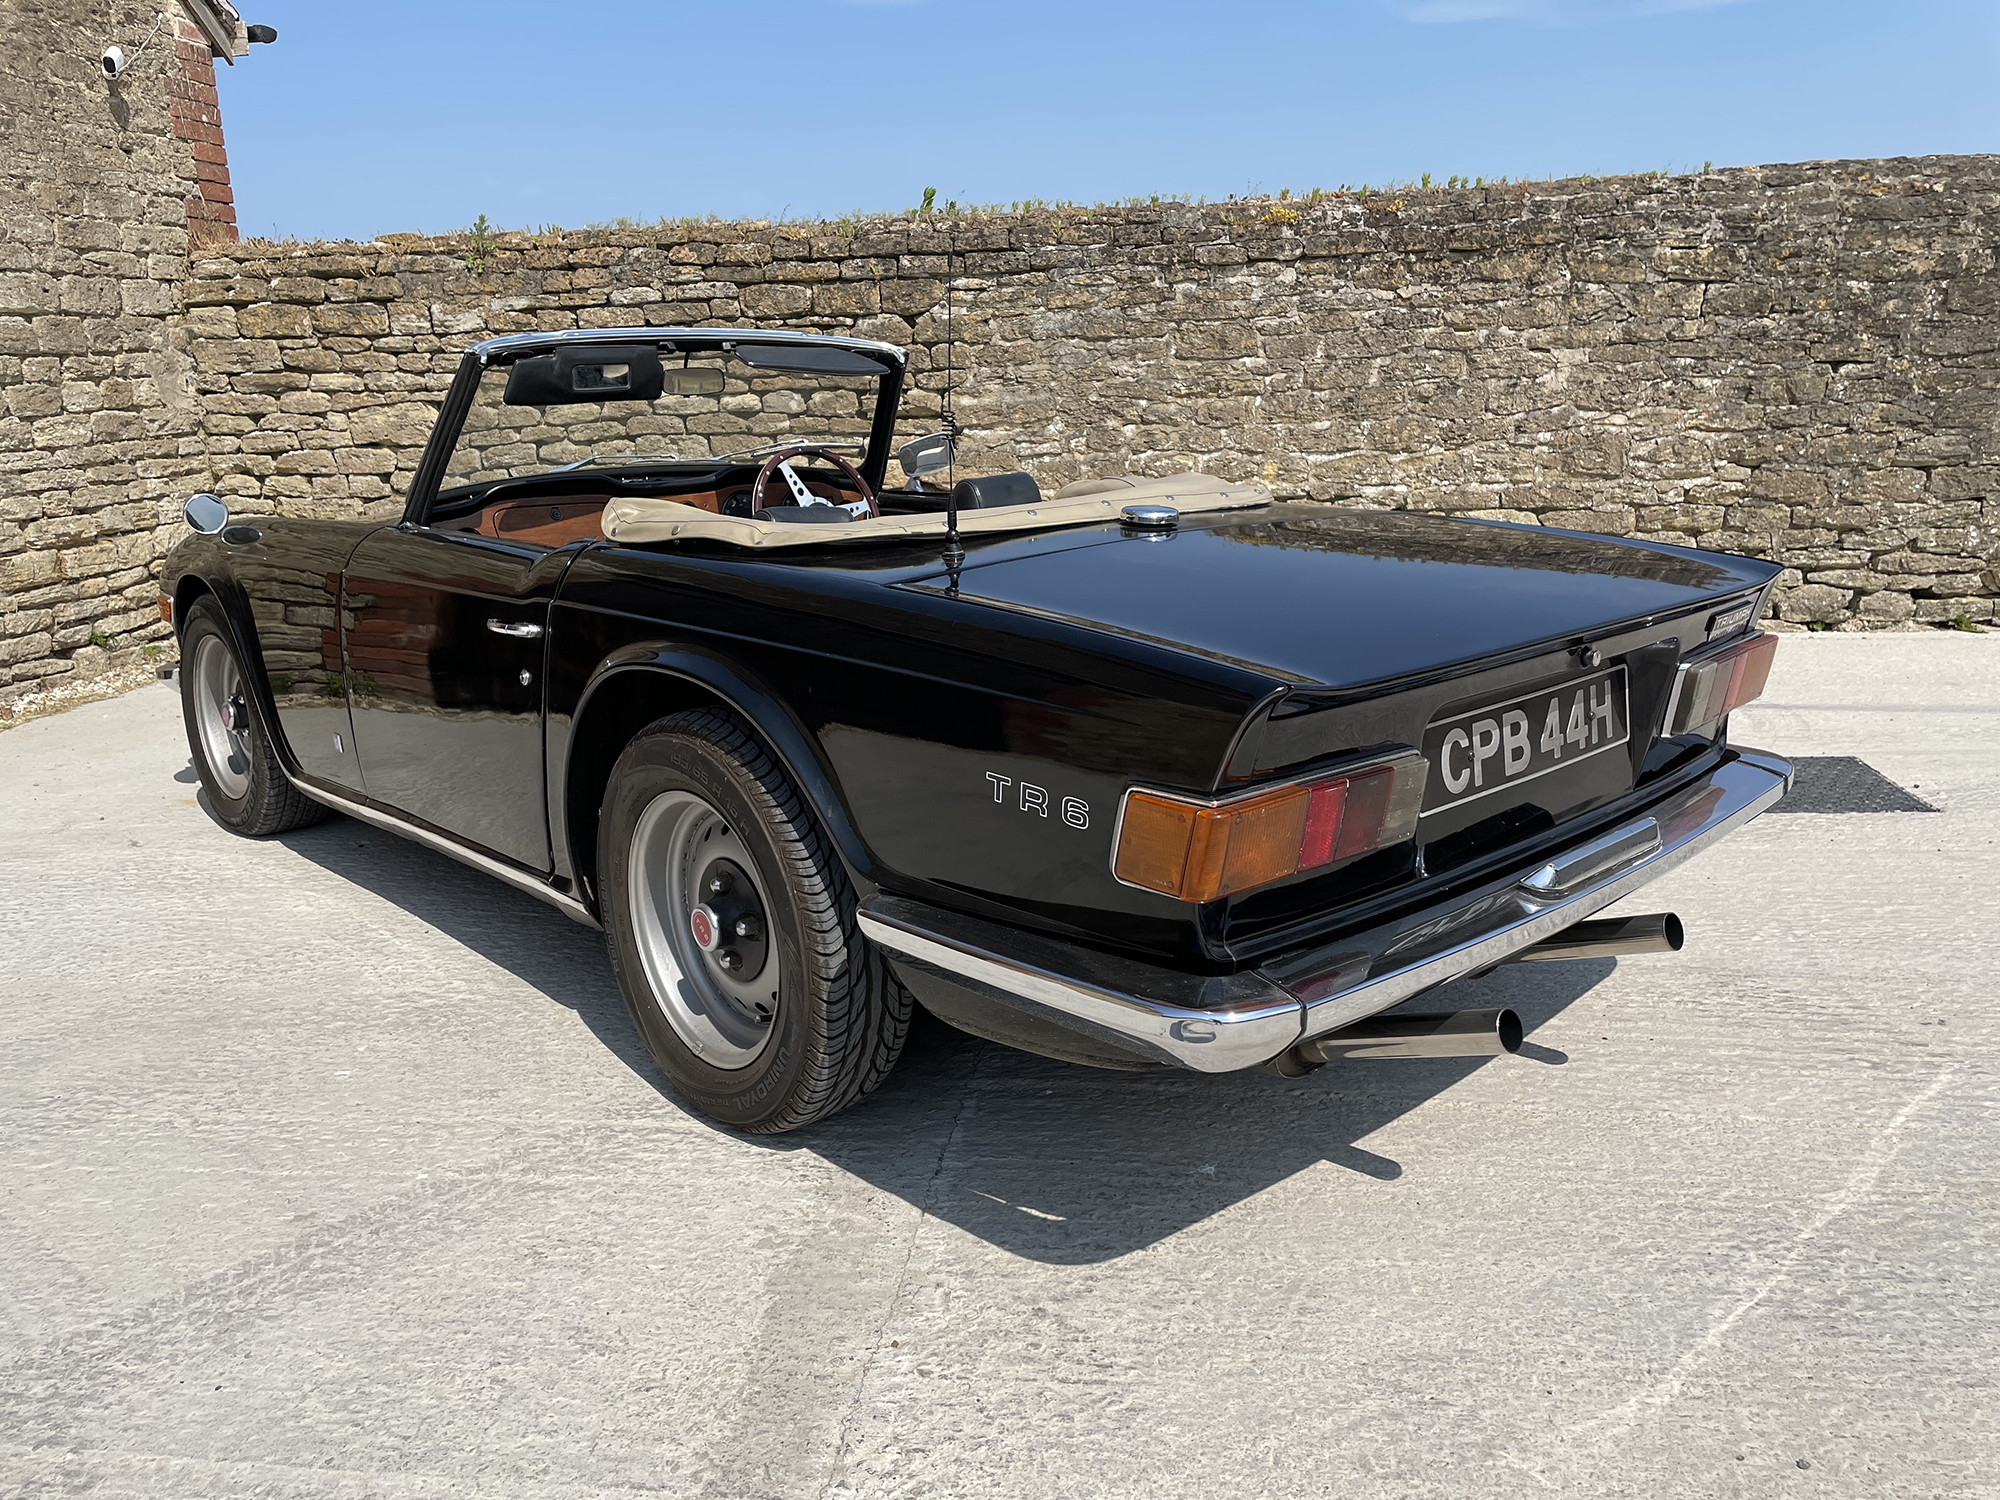 1970 Triumph TR6 Reg. no. CPB 44H Chassis no. CP513450 Engine no. CP25693HE - Image 8 of 21